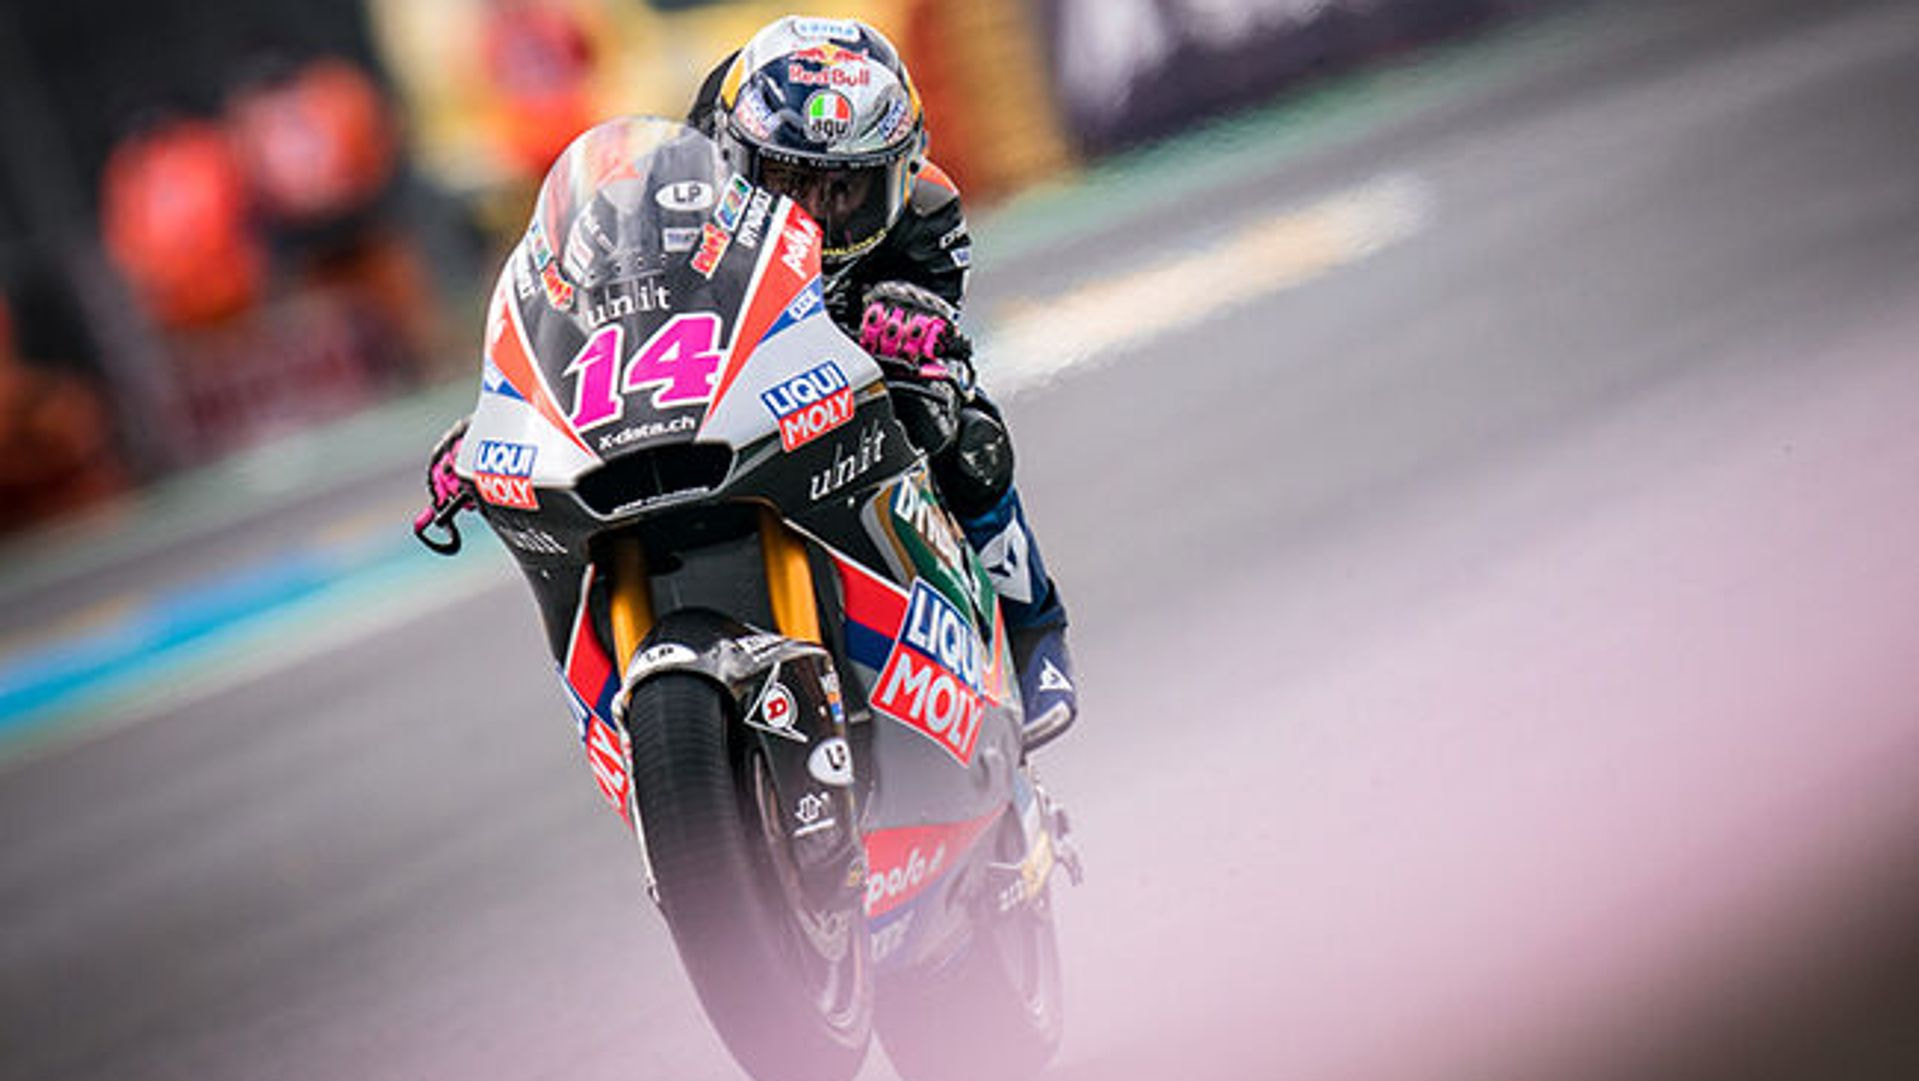 , the MotoGP returns to Mugello: one of the most spectacular circuits, where you are called to deal with terrible braking and curves to guess rather than see. 